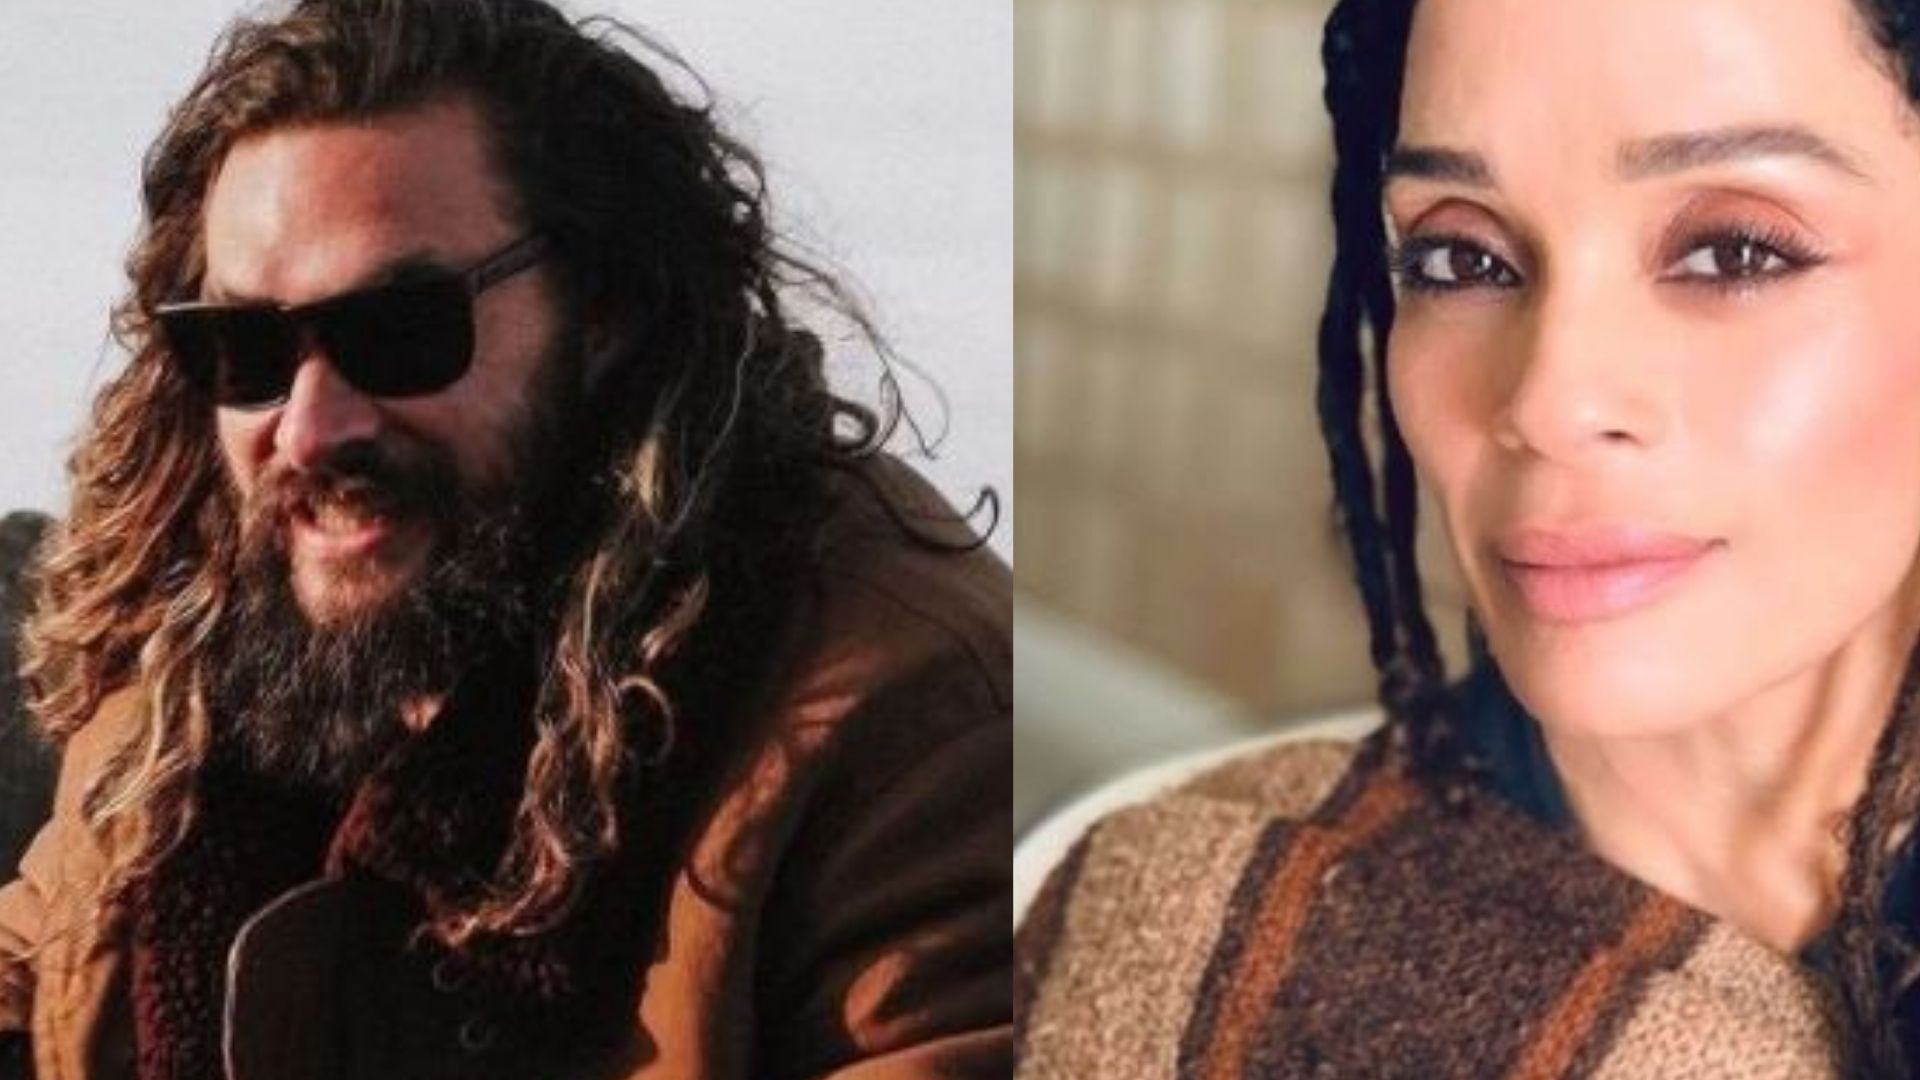 We Are Parting Ways In Marriage Jason Momoa and Lisa Bonet announce their divorce